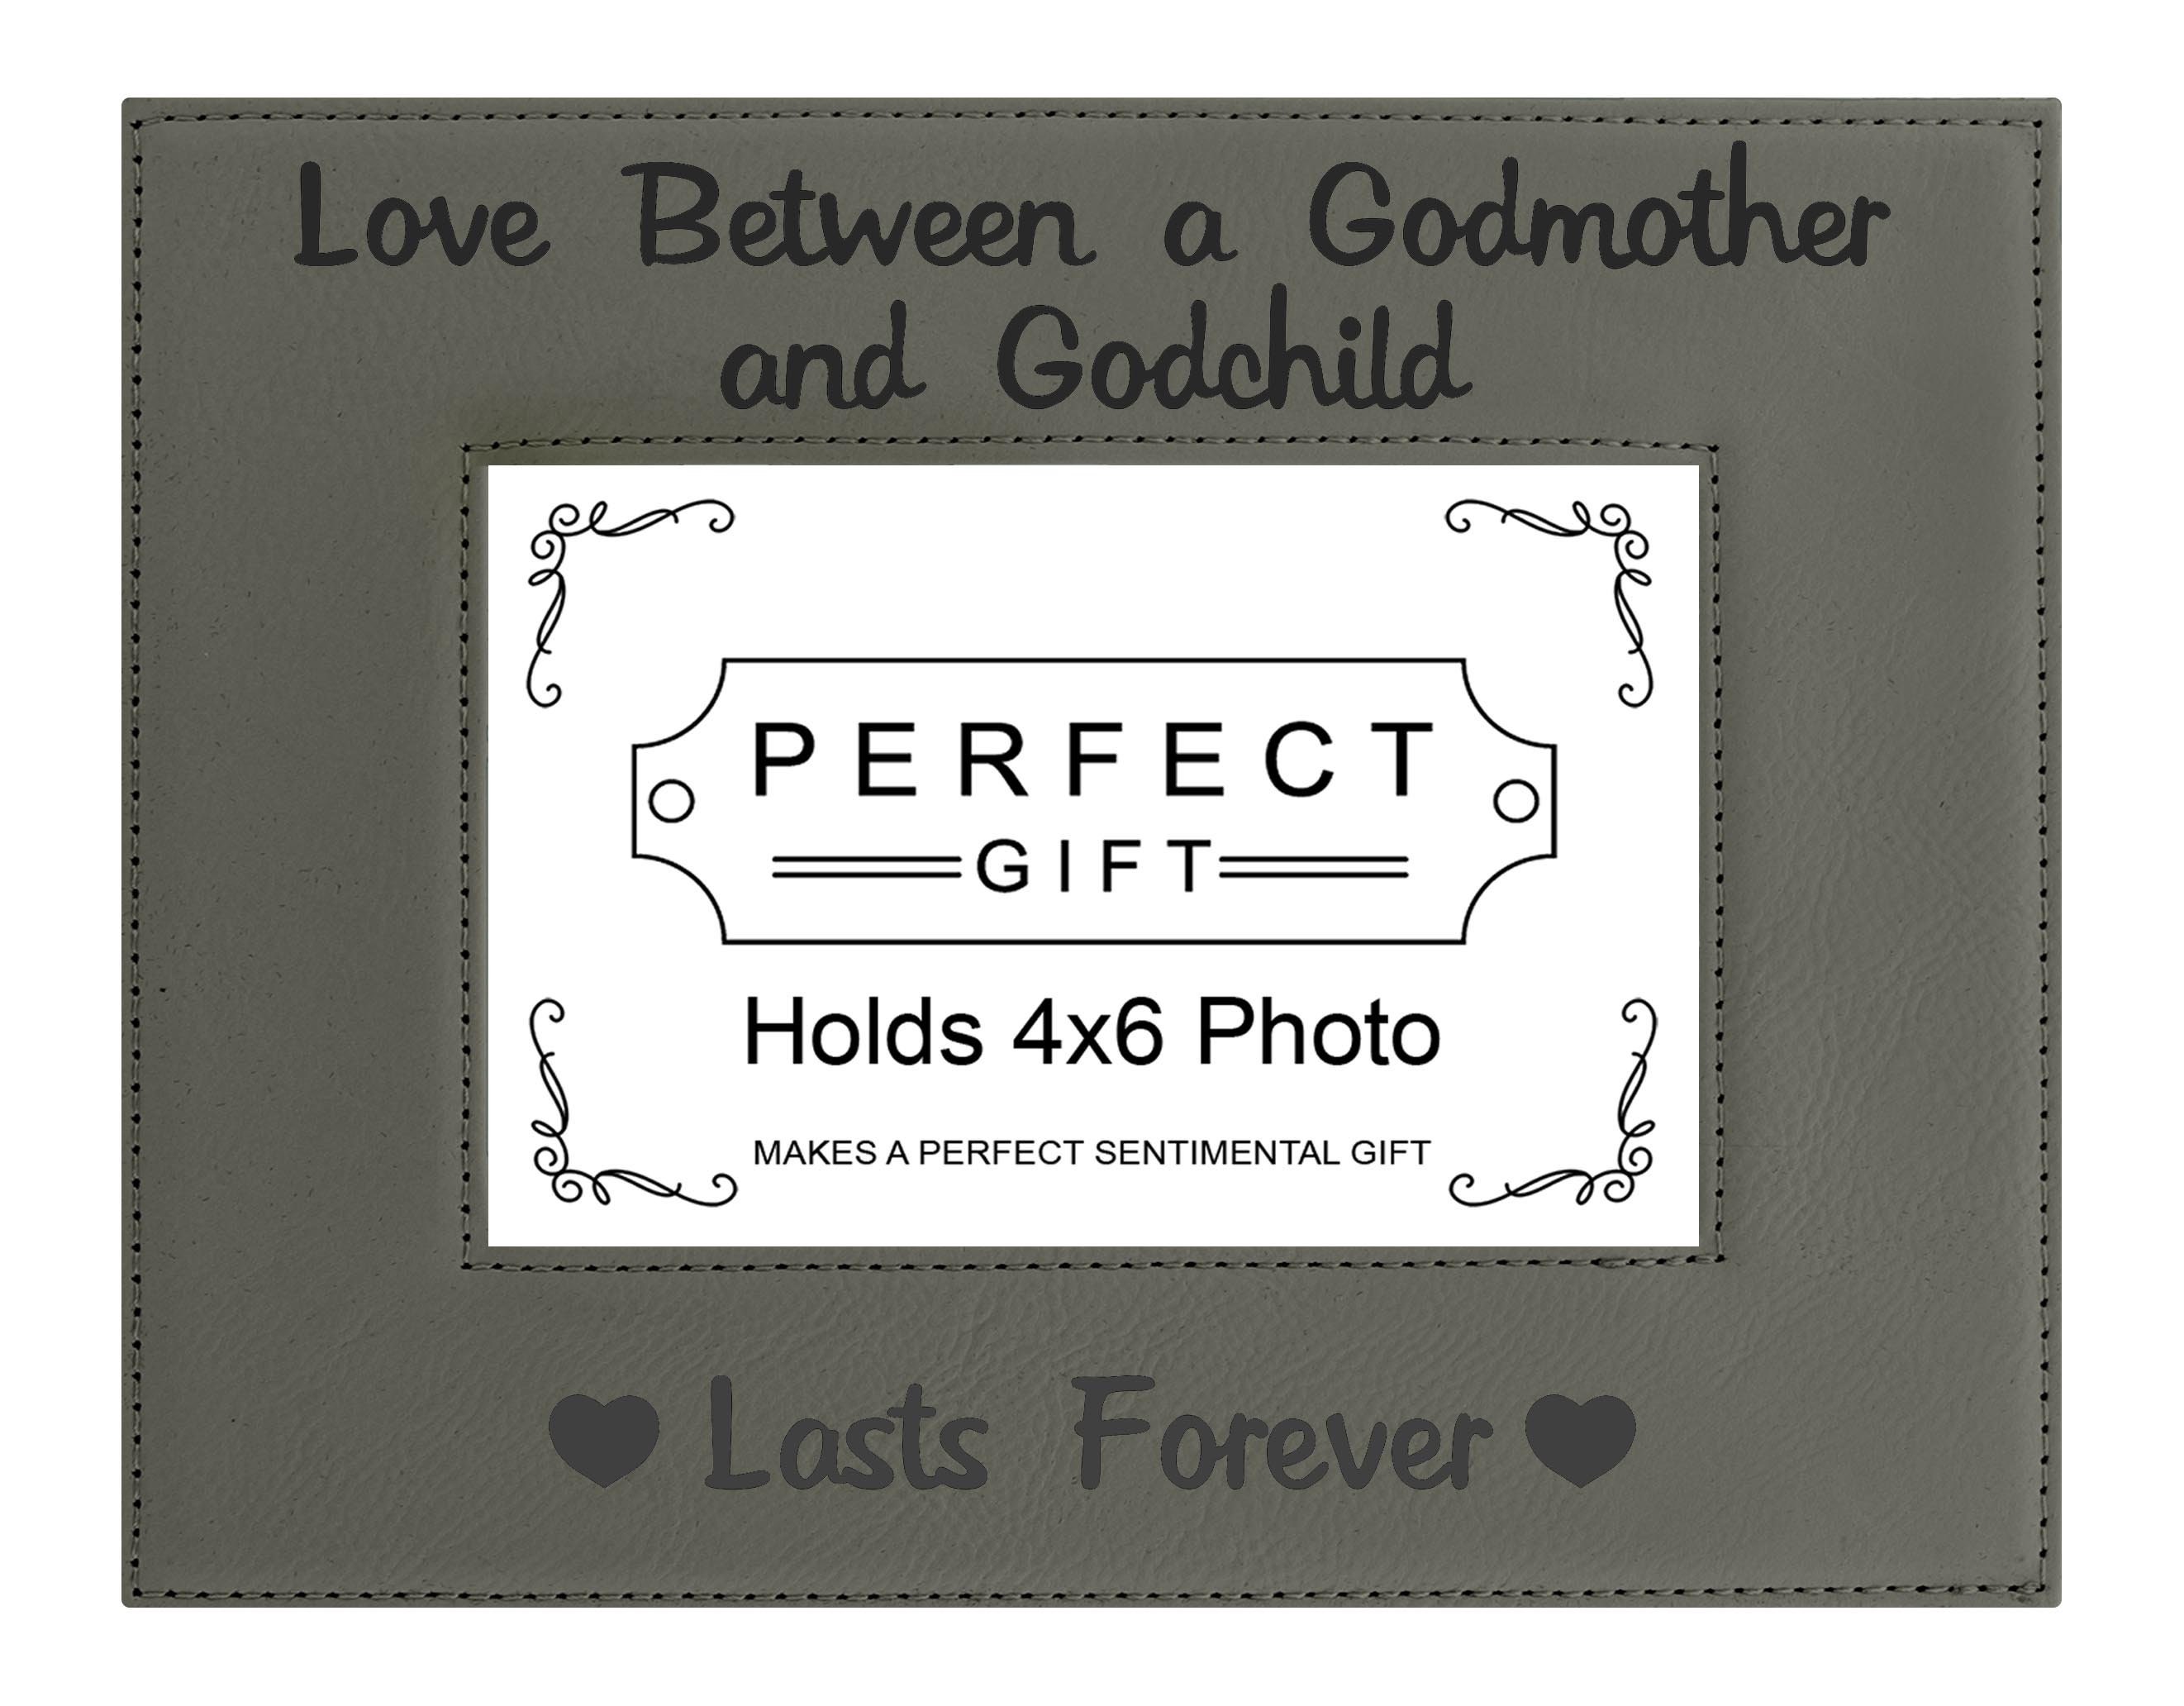 ThisWear Godmother Frame Love Between Godmother and Godchild Lasts Forever 4x6 Leatherette Photo Frame Black 